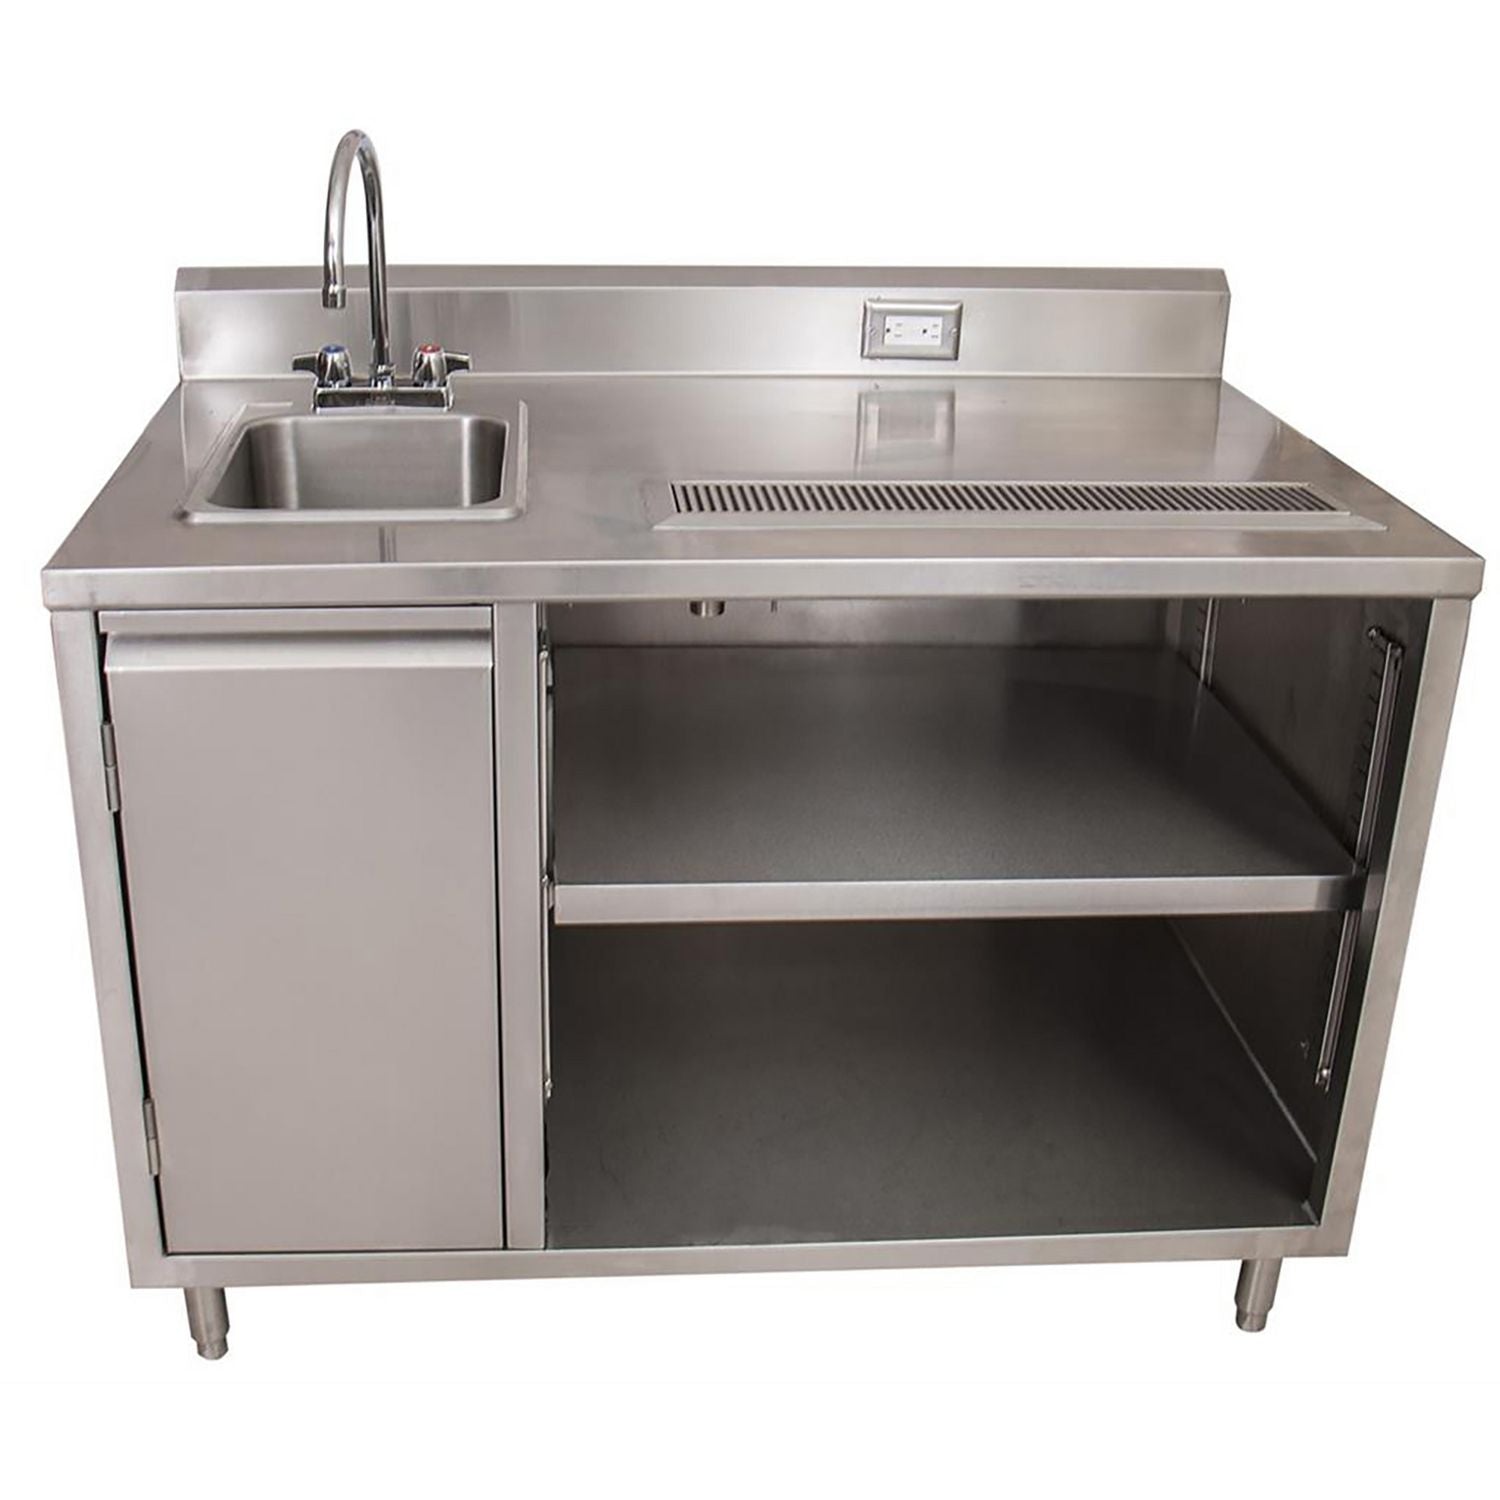 stainless-steel-beverage-table-with-left-sink-rectangular-30-x-60-x-415-silver-top-base-ships-in-4-6-business-days_bkebevt3060l - 1